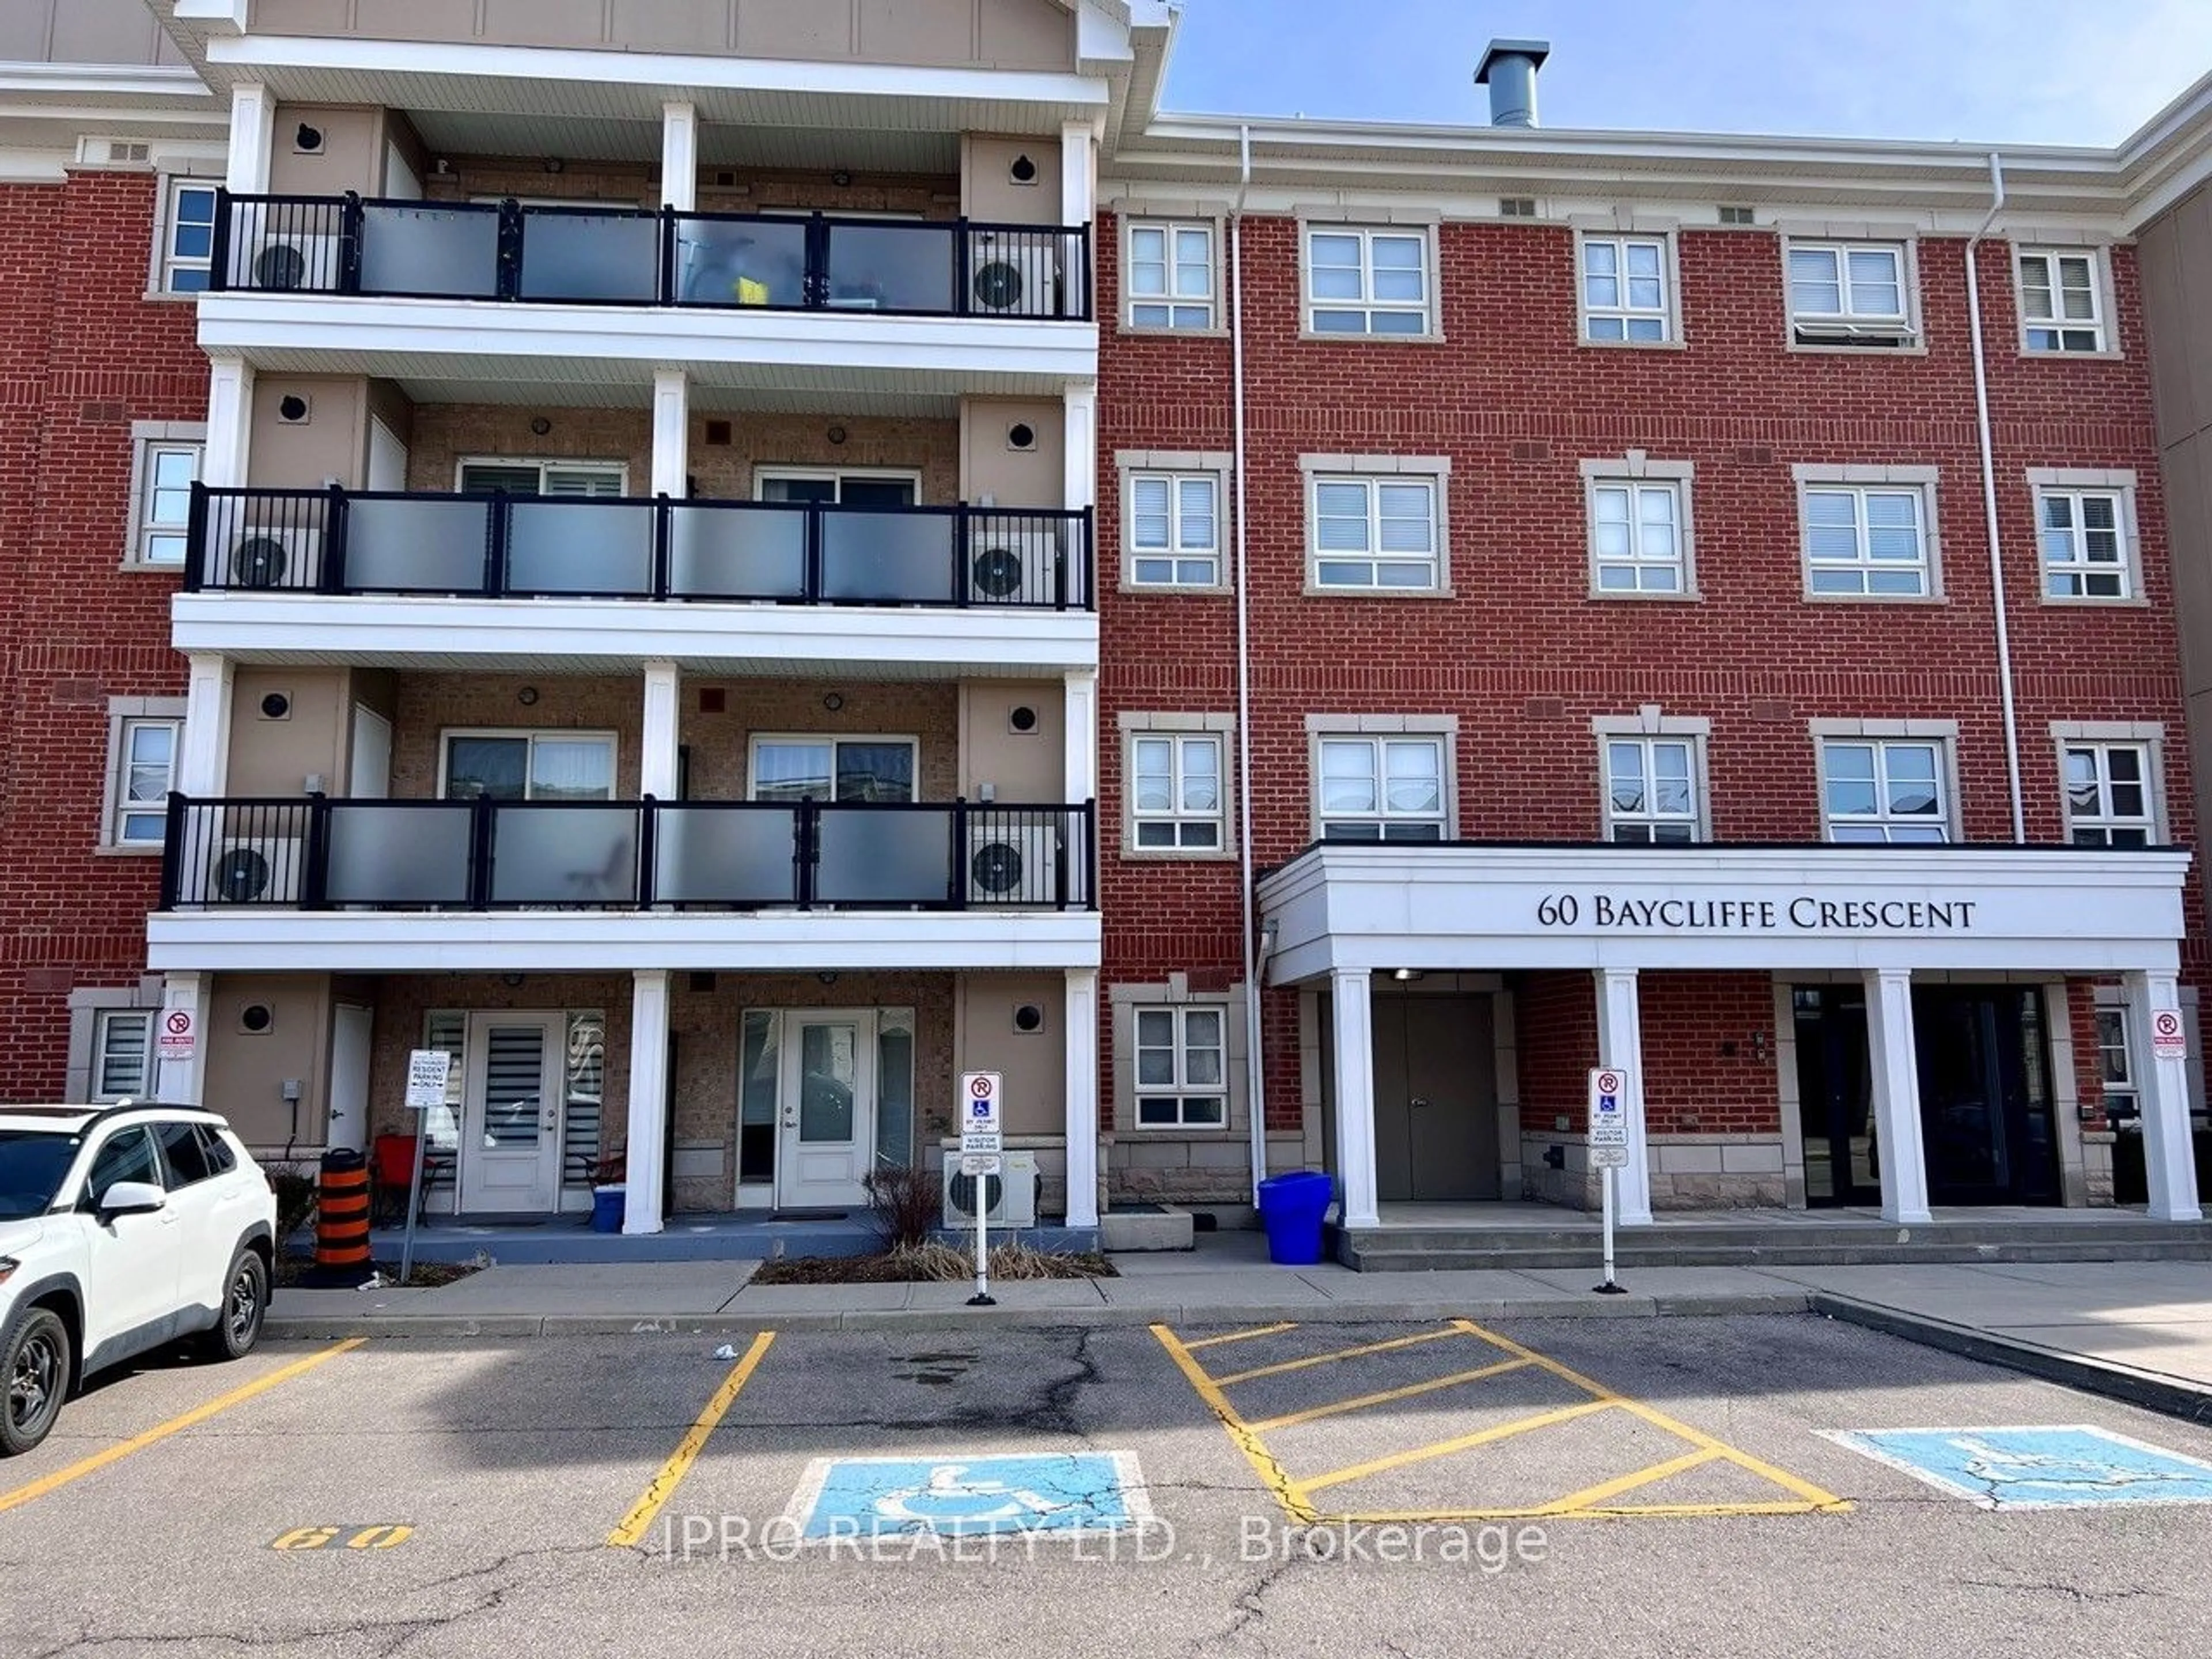 A pic from exterior of the house or condo for 60 Baycliffe Cres #101, Brampton Ontario L1P 1W7